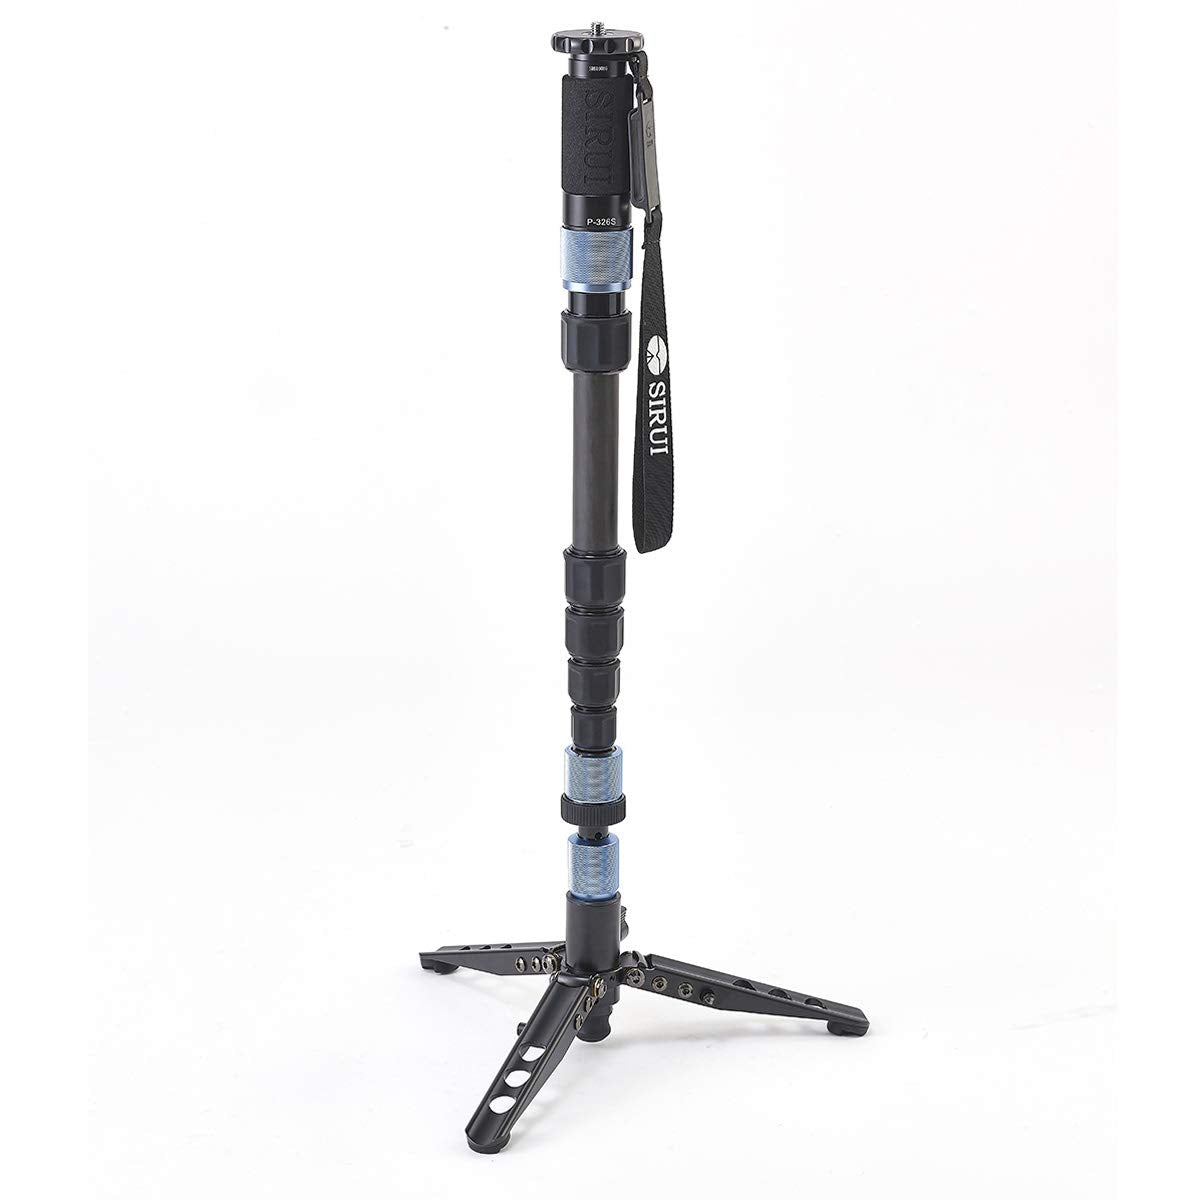 SIRUI P-326SR Monopod with Spider and Video Head 20 Tilting and 360Rotating Aluminium